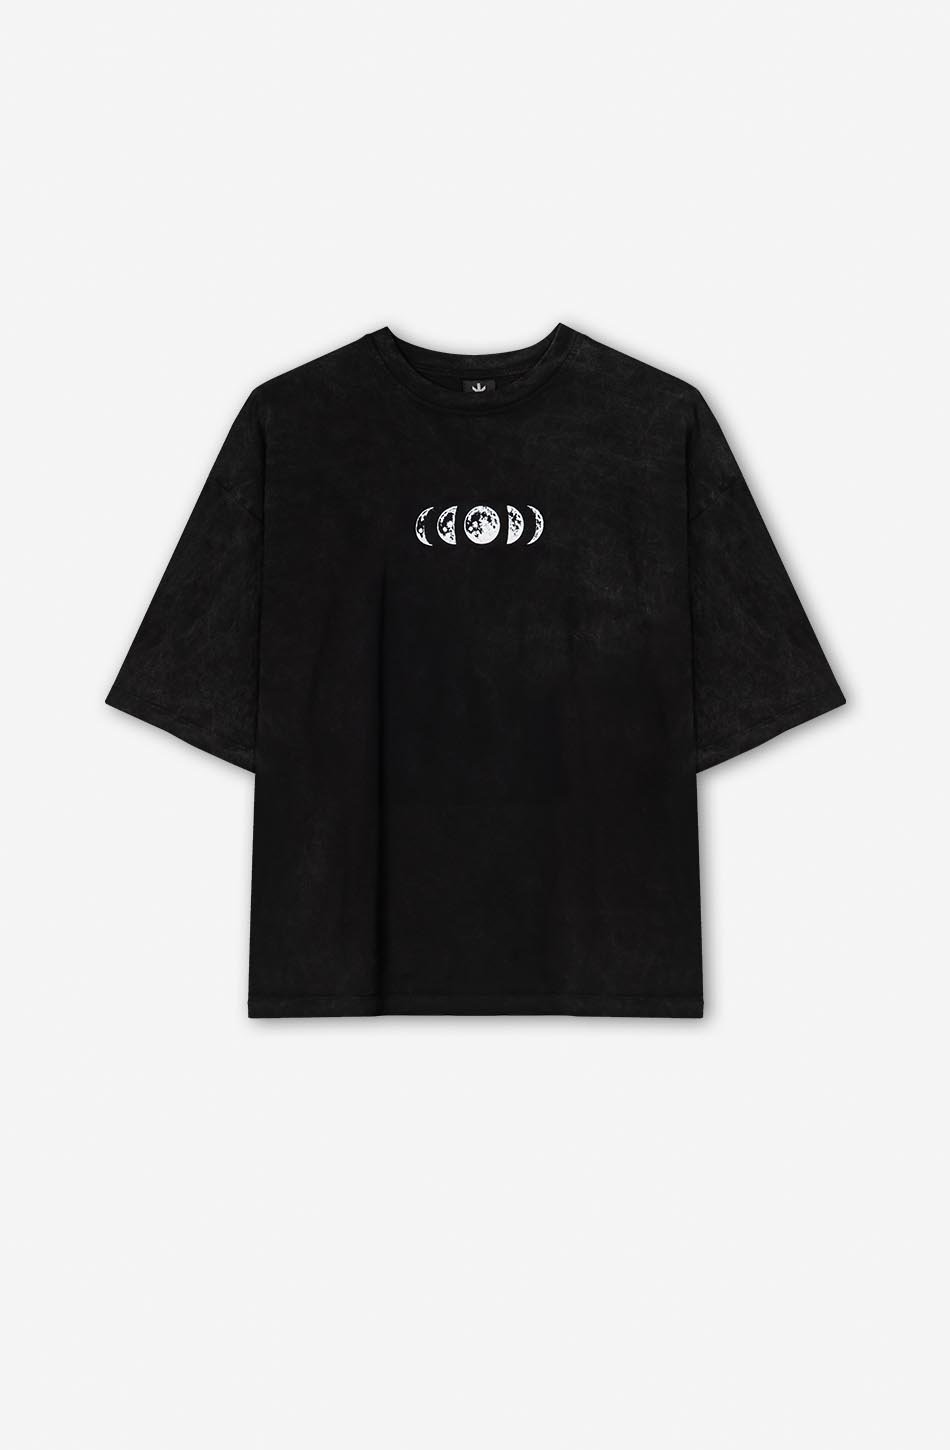 Black Hand Space Cropped T-Shirt